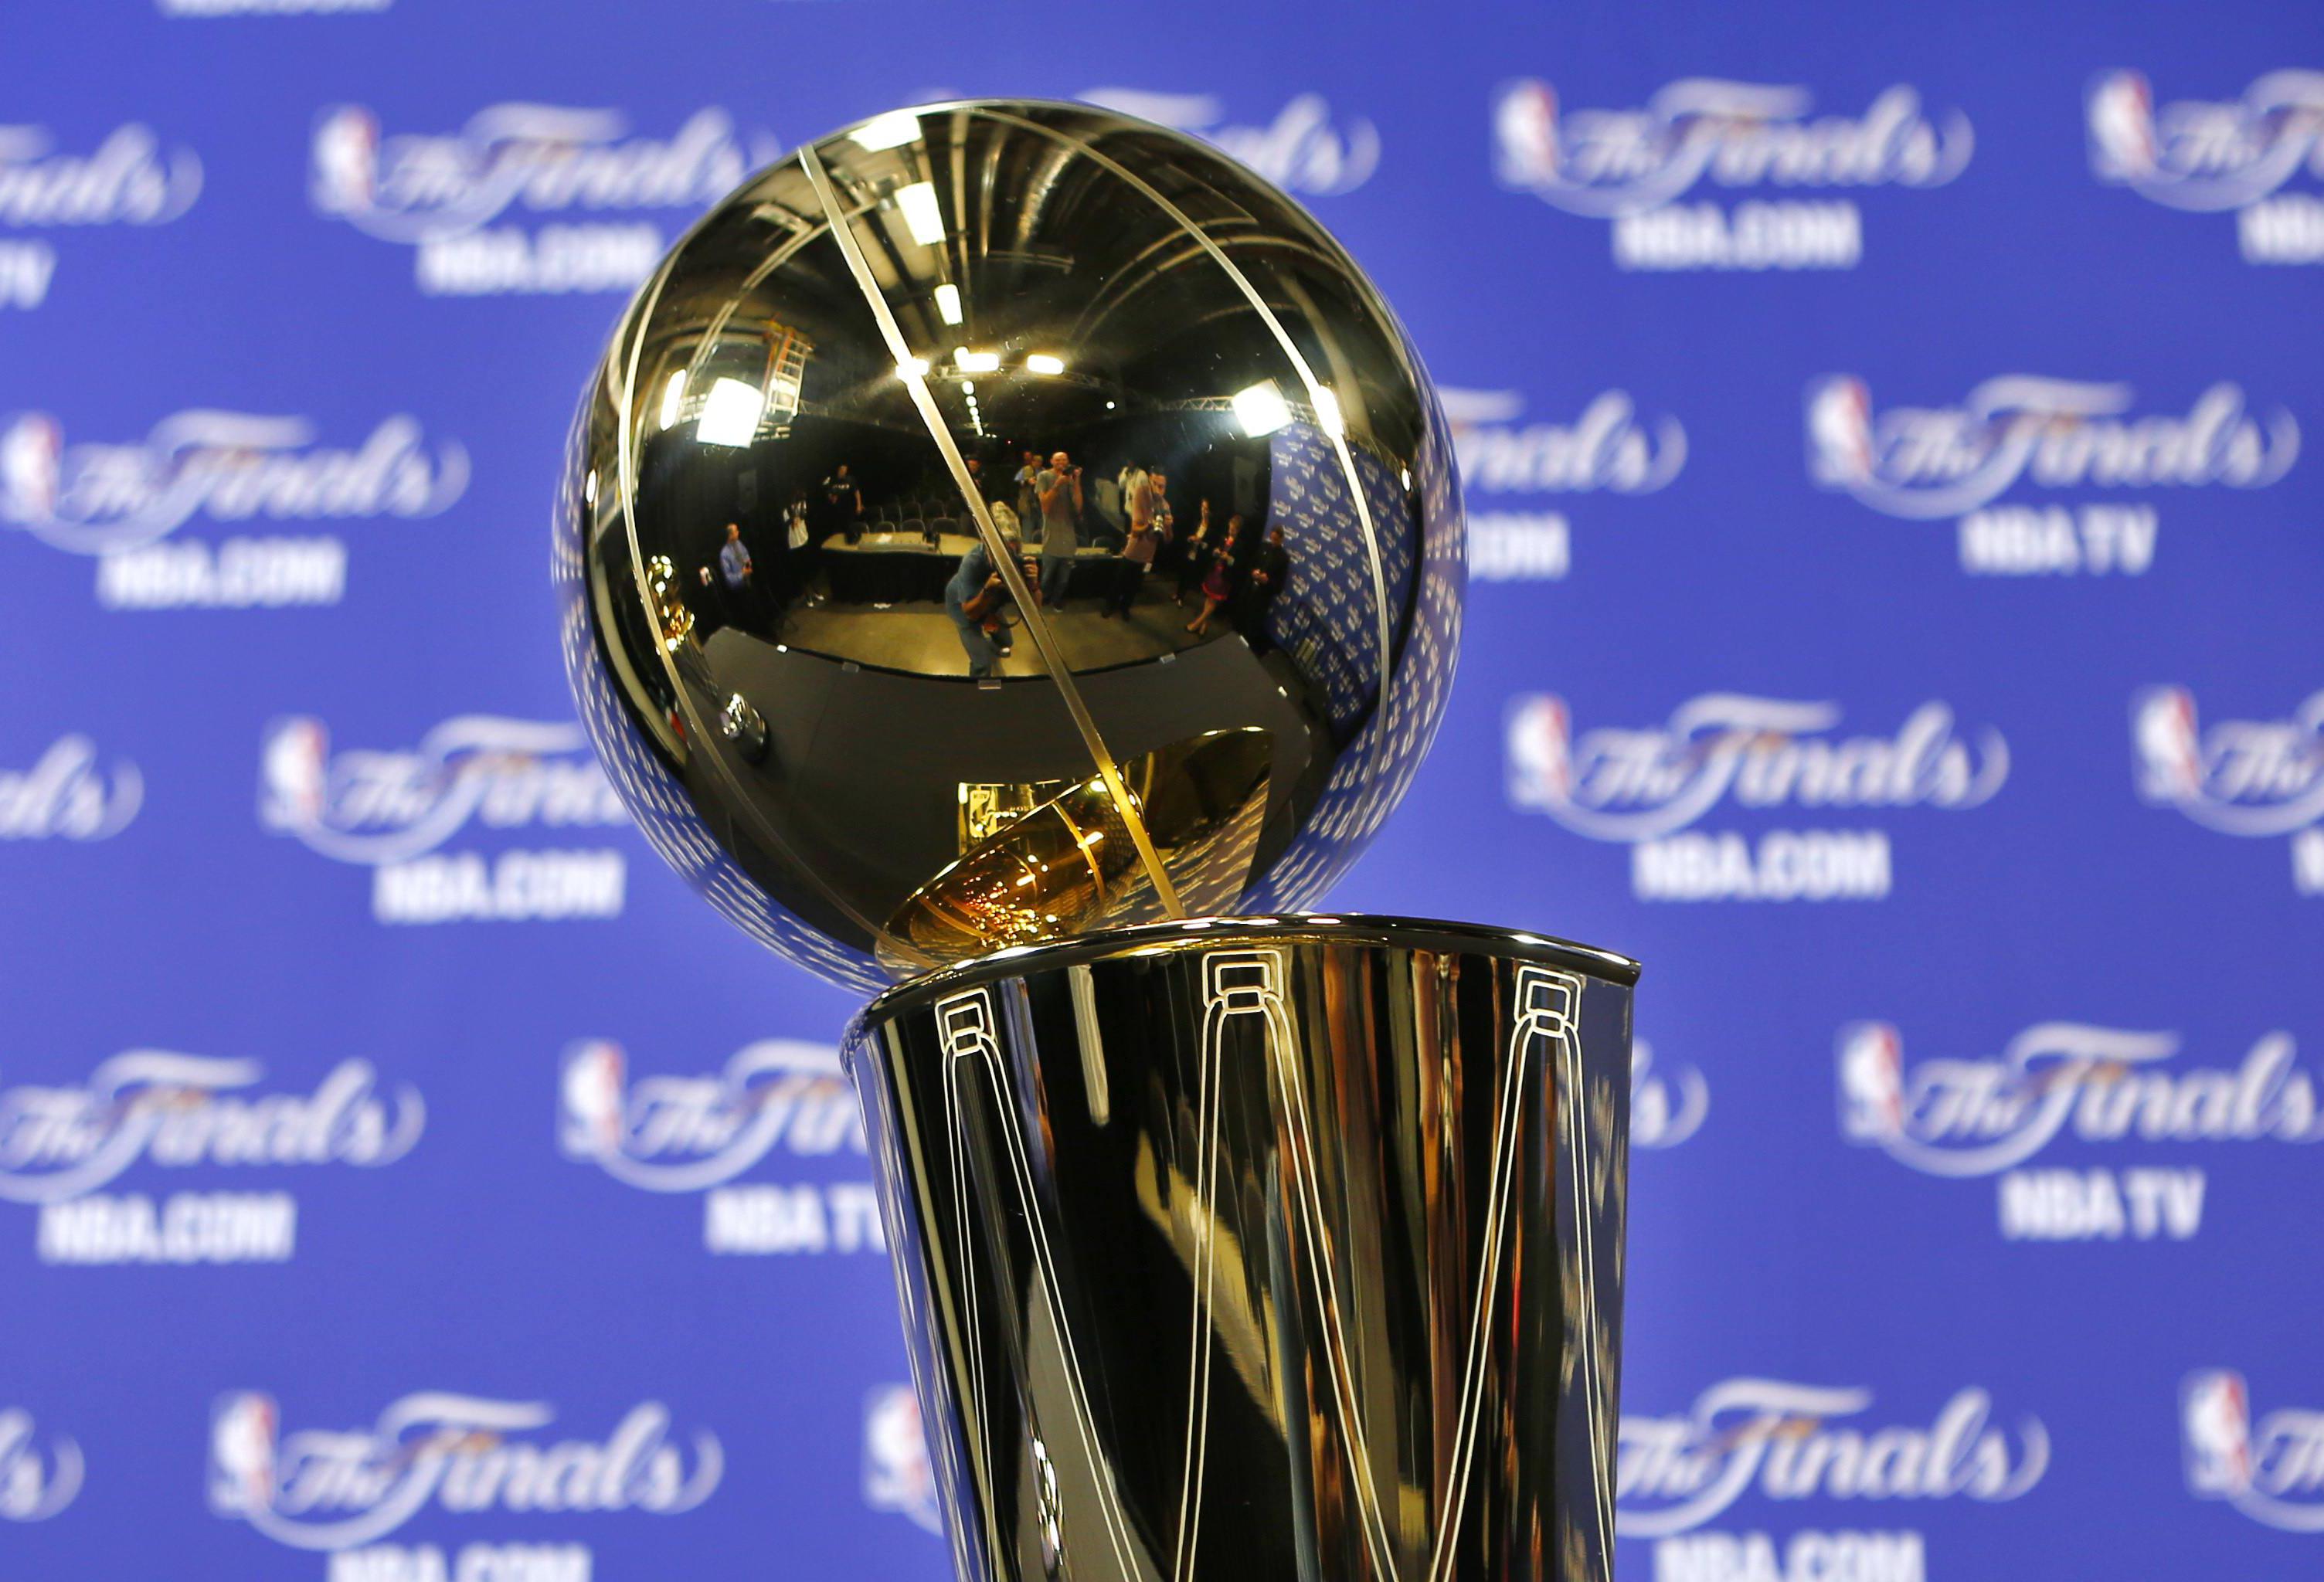 NBA's Larry O'Brien trophy ready for the winners of game seven | GMA News Online